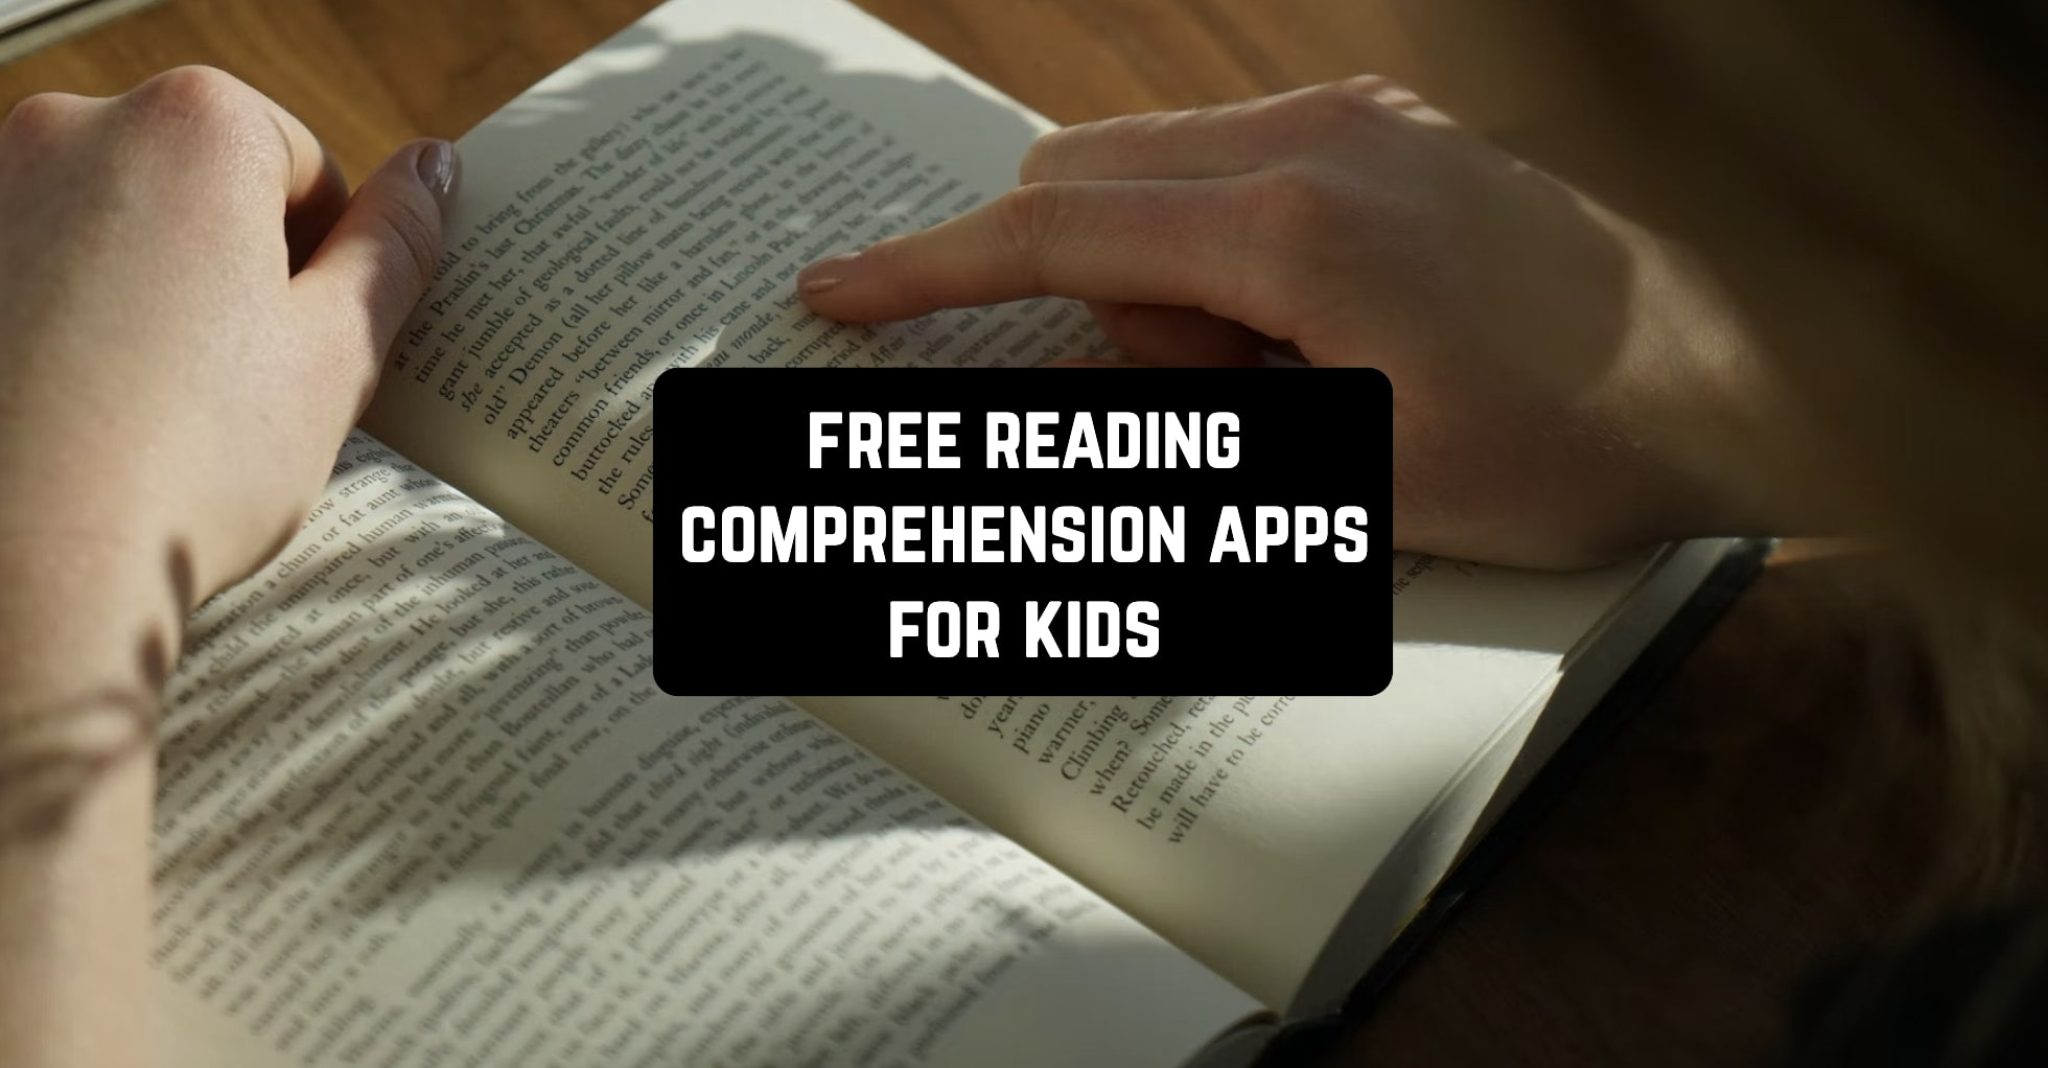 9-free-reading-comprehension-apps-for-kids-android-ios